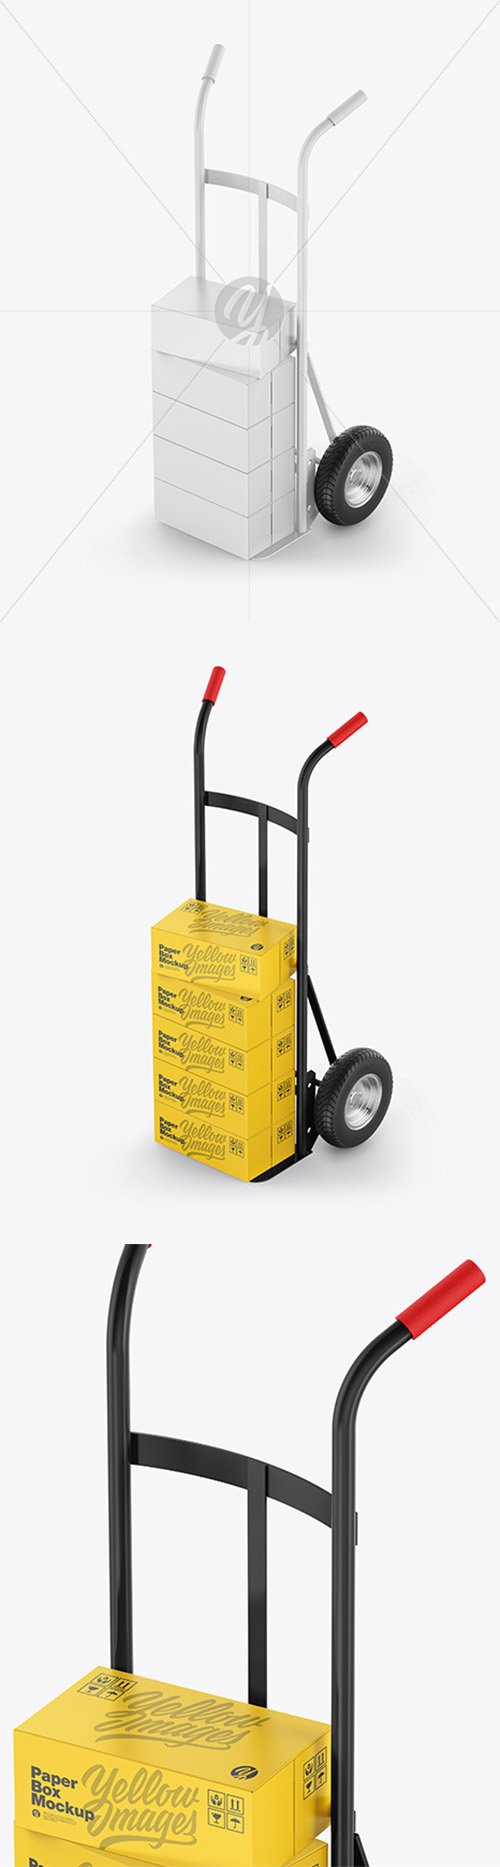 Hand Truck With Boxes Mockup 64329